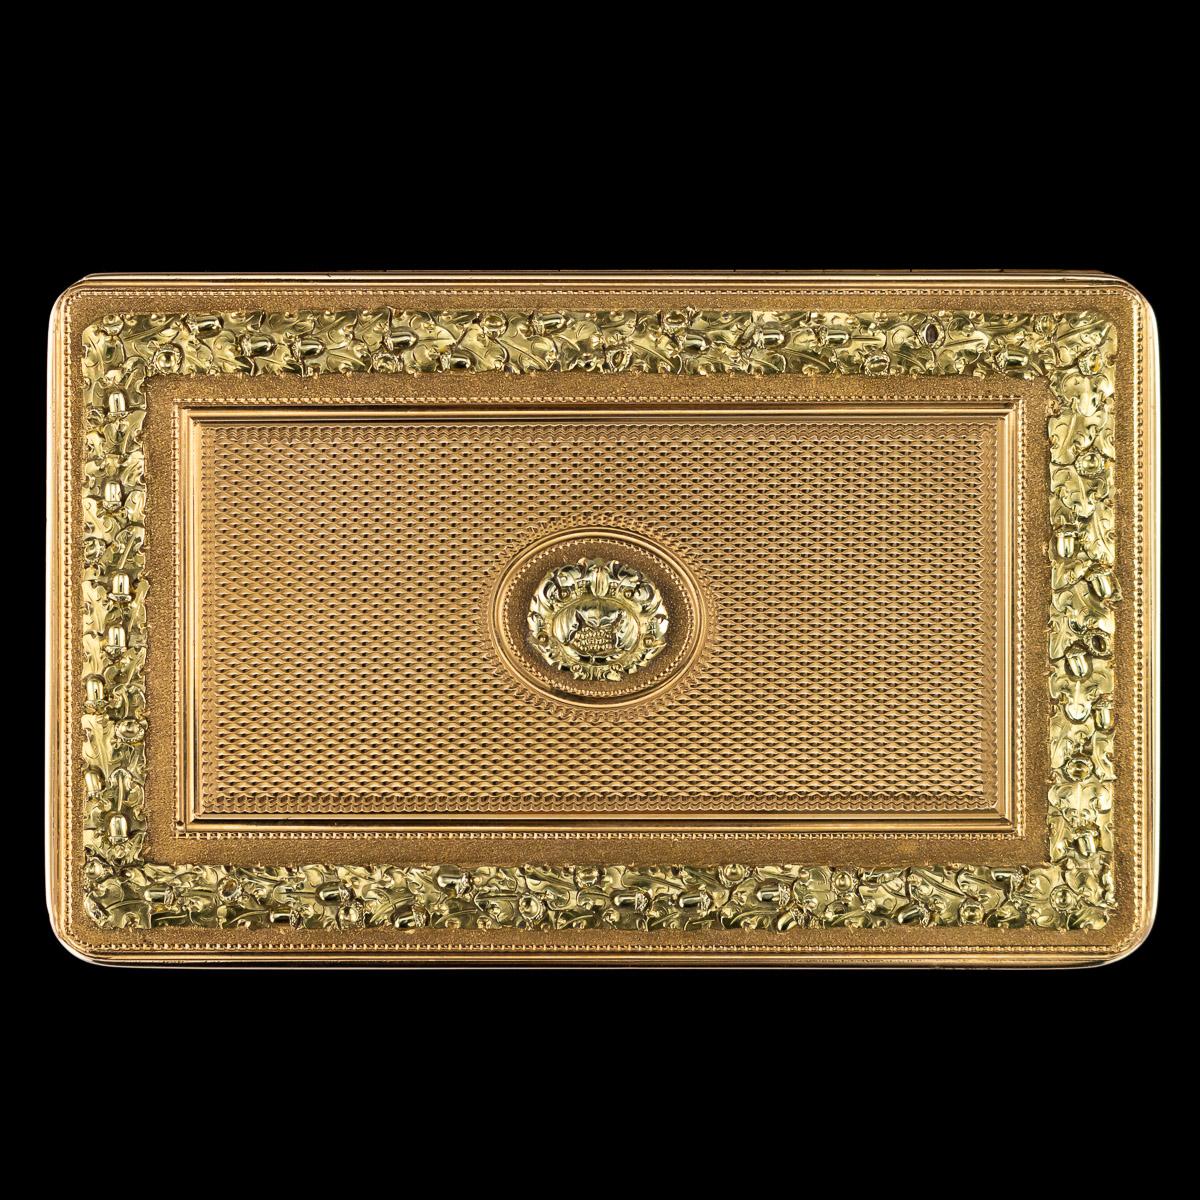 Antique early 19th century Victorian 18-karat two-color gold snuff box, rectangular shaped, cover and base profusely applied with acorns and oak leaves, on an engine turned ground, the interior cover with Political presentation